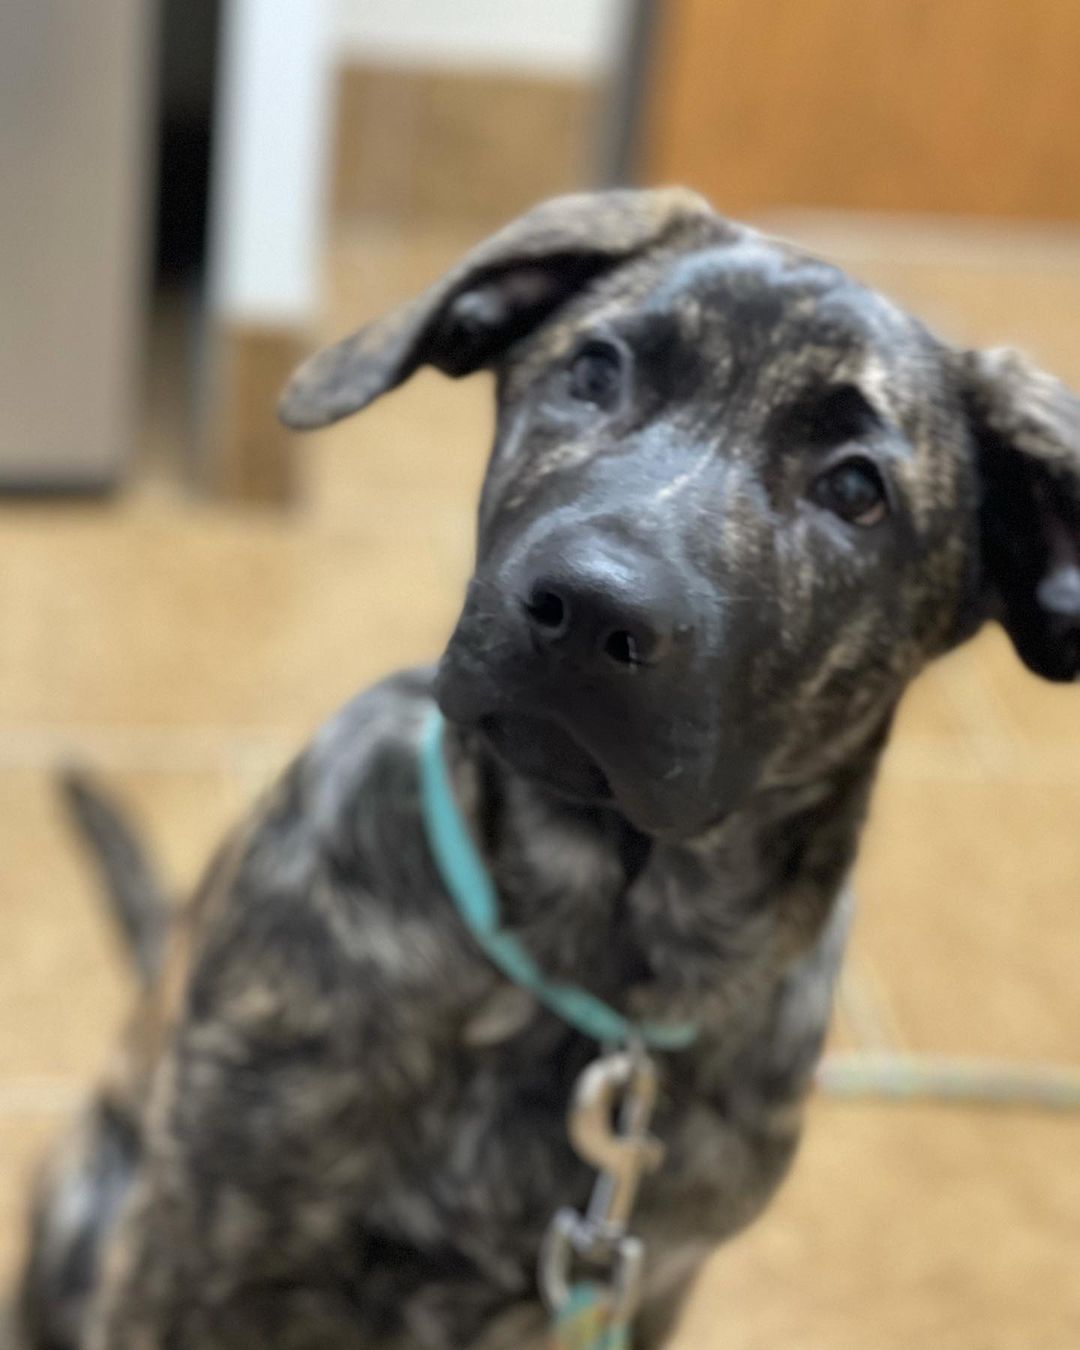 Welcome to the good life Java! 

This sweet girl is a 13 week old <a target='_blank' href='https://www.instagram.com/explore/tags/mastiffshepherdmix/'>#mastiffshepherdmix</a> and a complete sweetie 

<a target='_blank' href='https://www.instagram.com/explore/tags/bdhp/'>#bdhp</a> <a target='_blank' href='https://www.instagram.com/explore/tags/bdhpi/'>#bdhpi</a> <a target='_blank' href='https://www.instagram.com/explore/tags/bigdoghugepaws/'>#bigdoghugepaws</a>